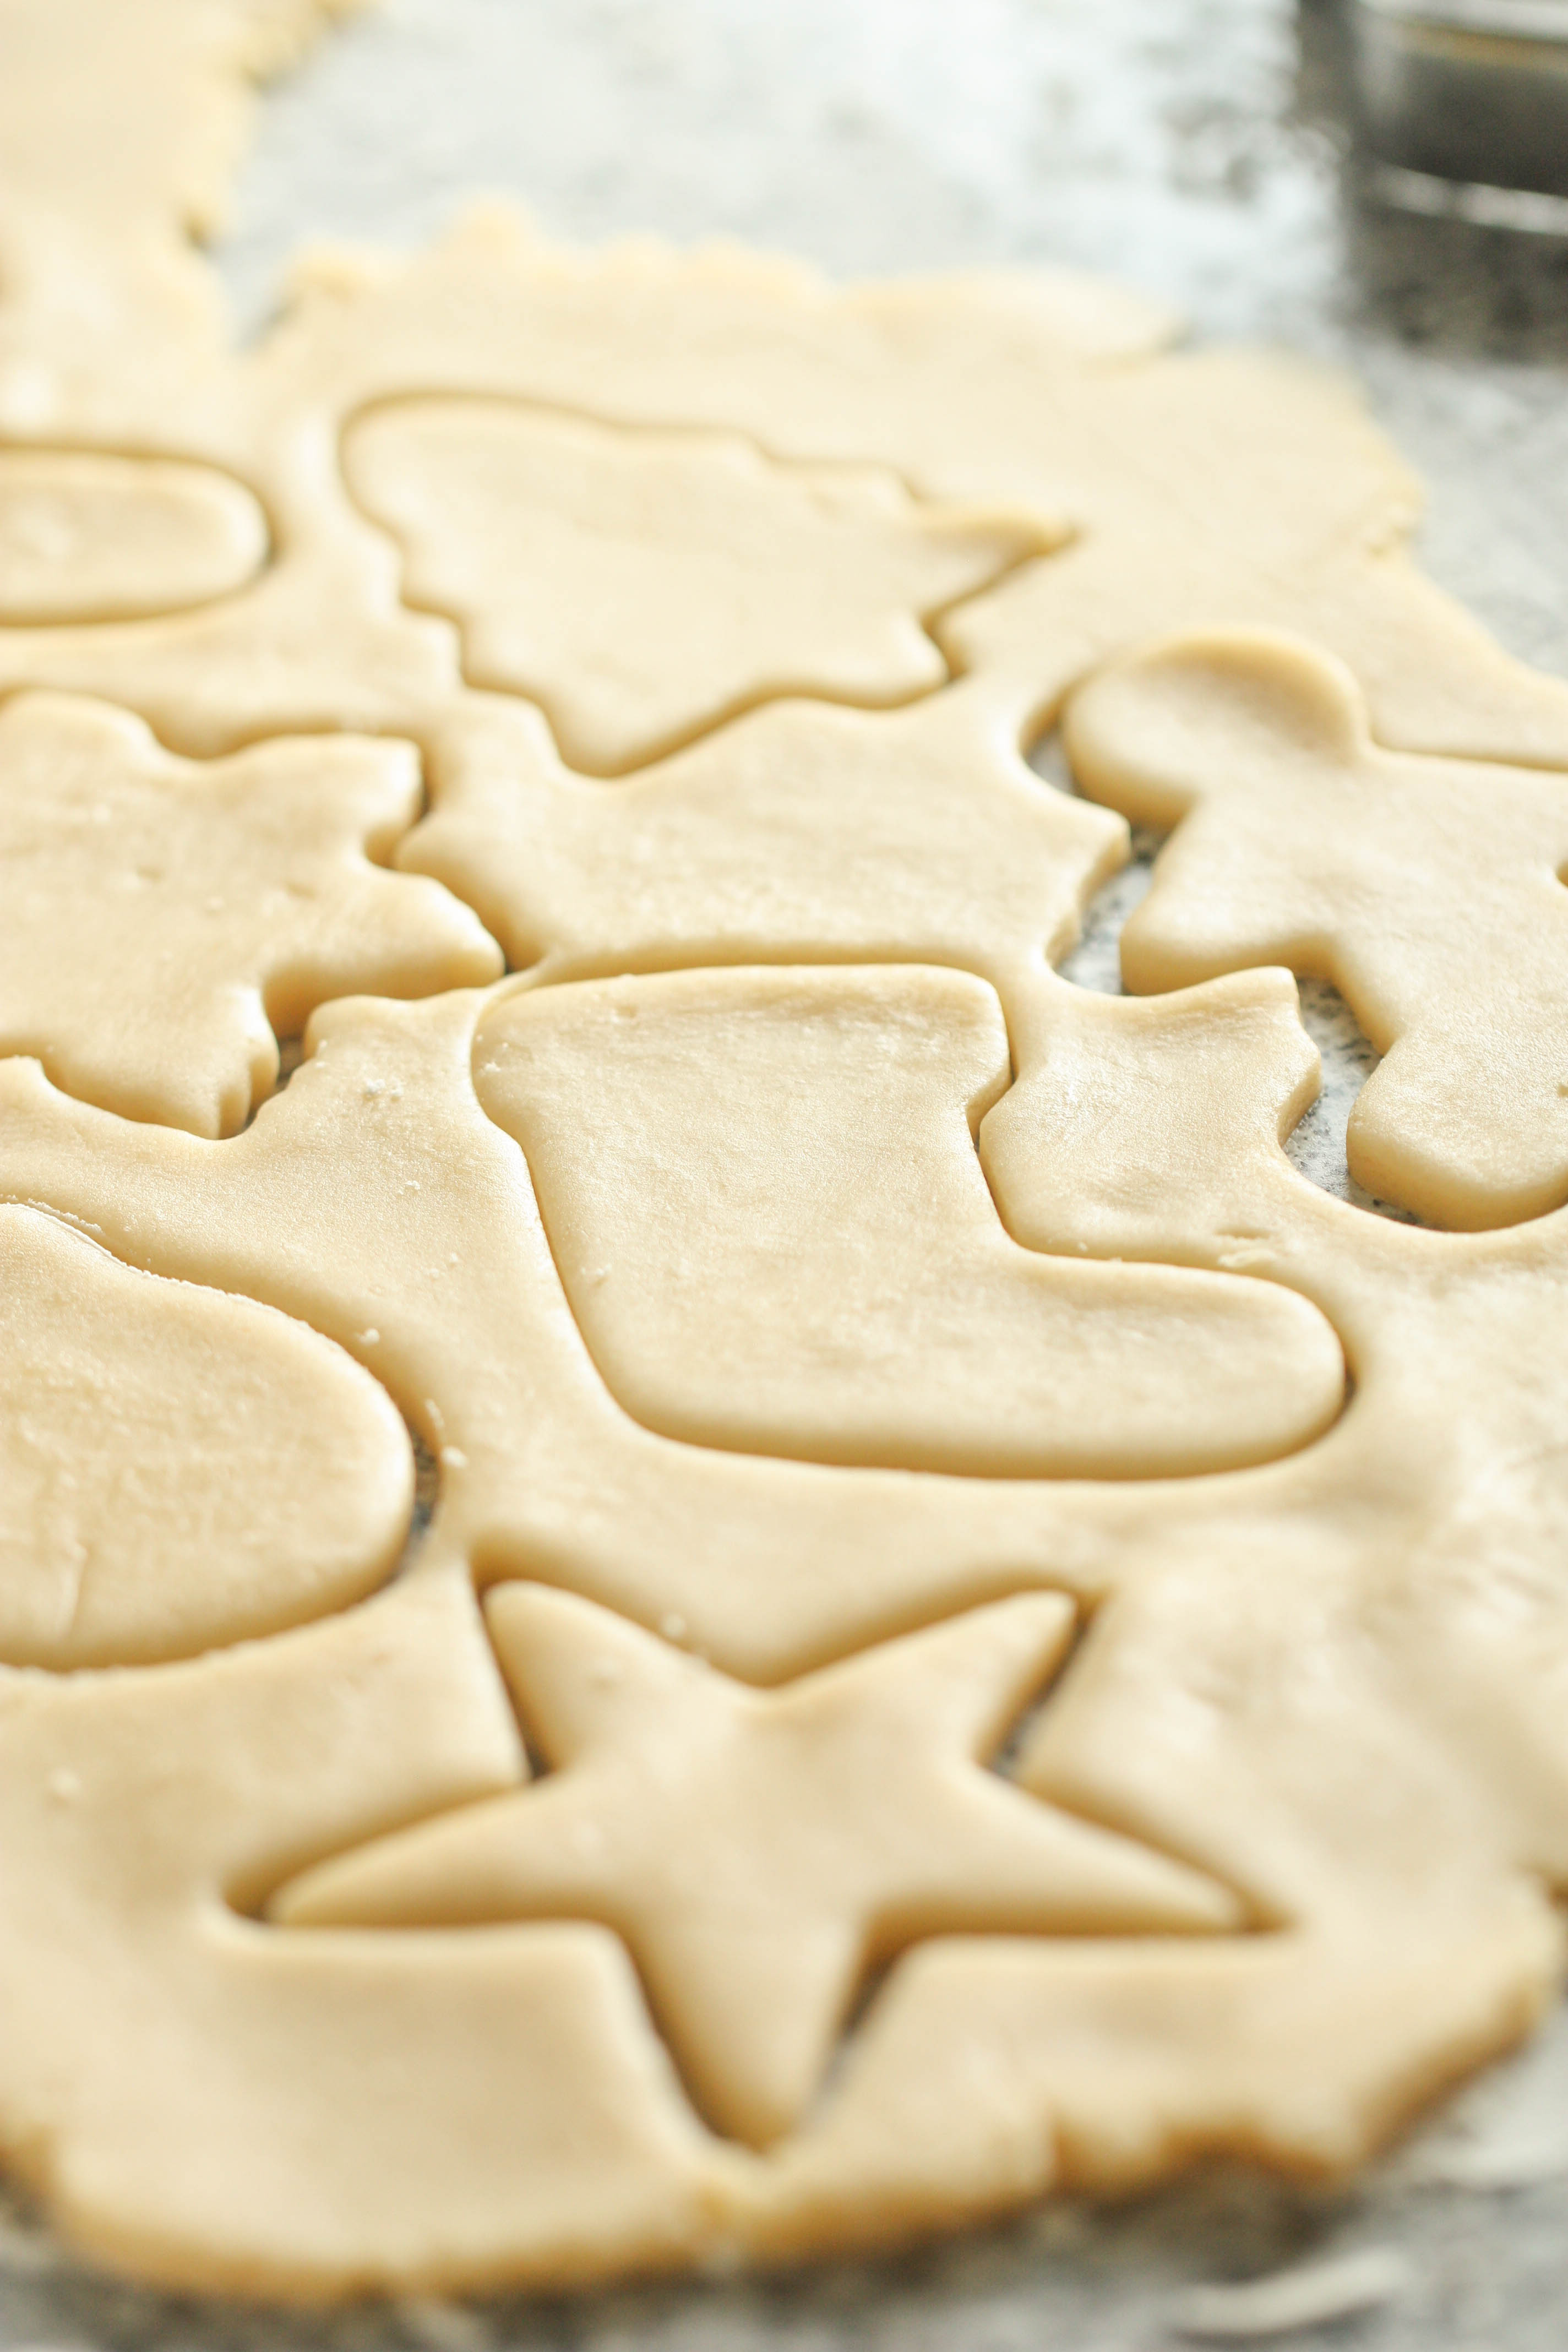 Sugar cookie dough with cutout shapes